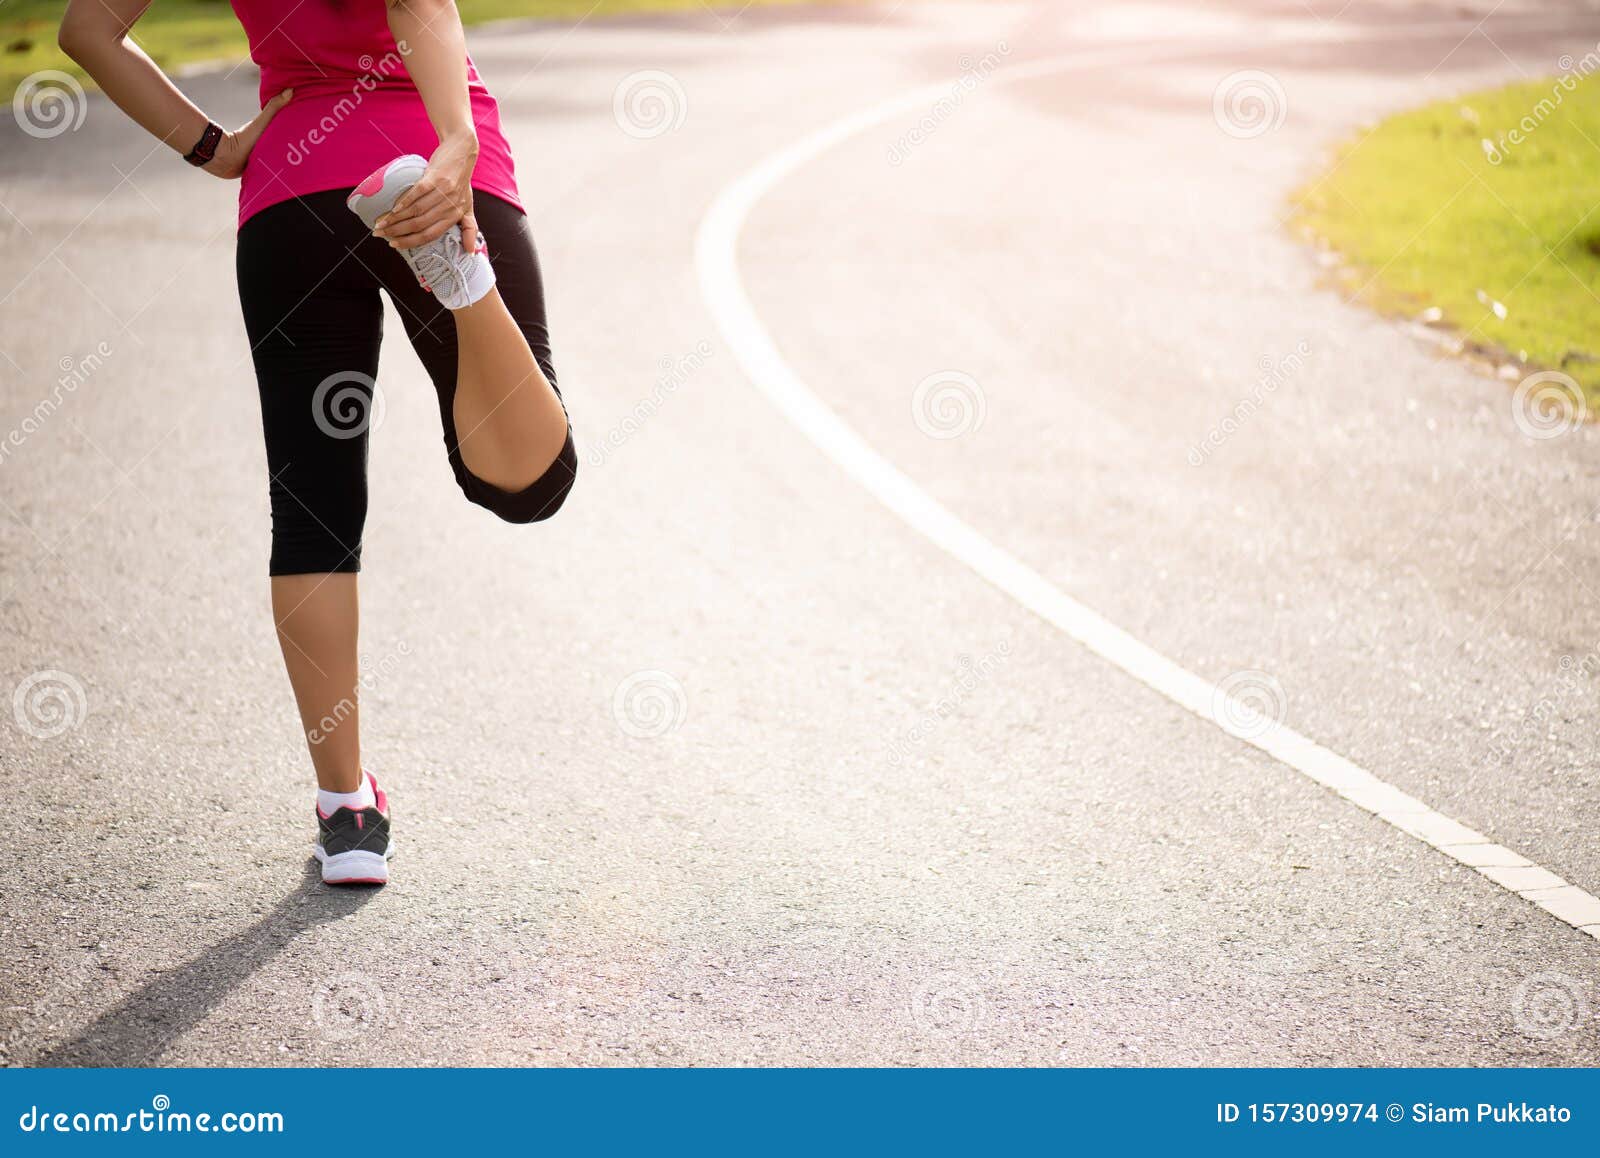 Young Fitness Woman Runner Stretching Legs Before Run In The Park